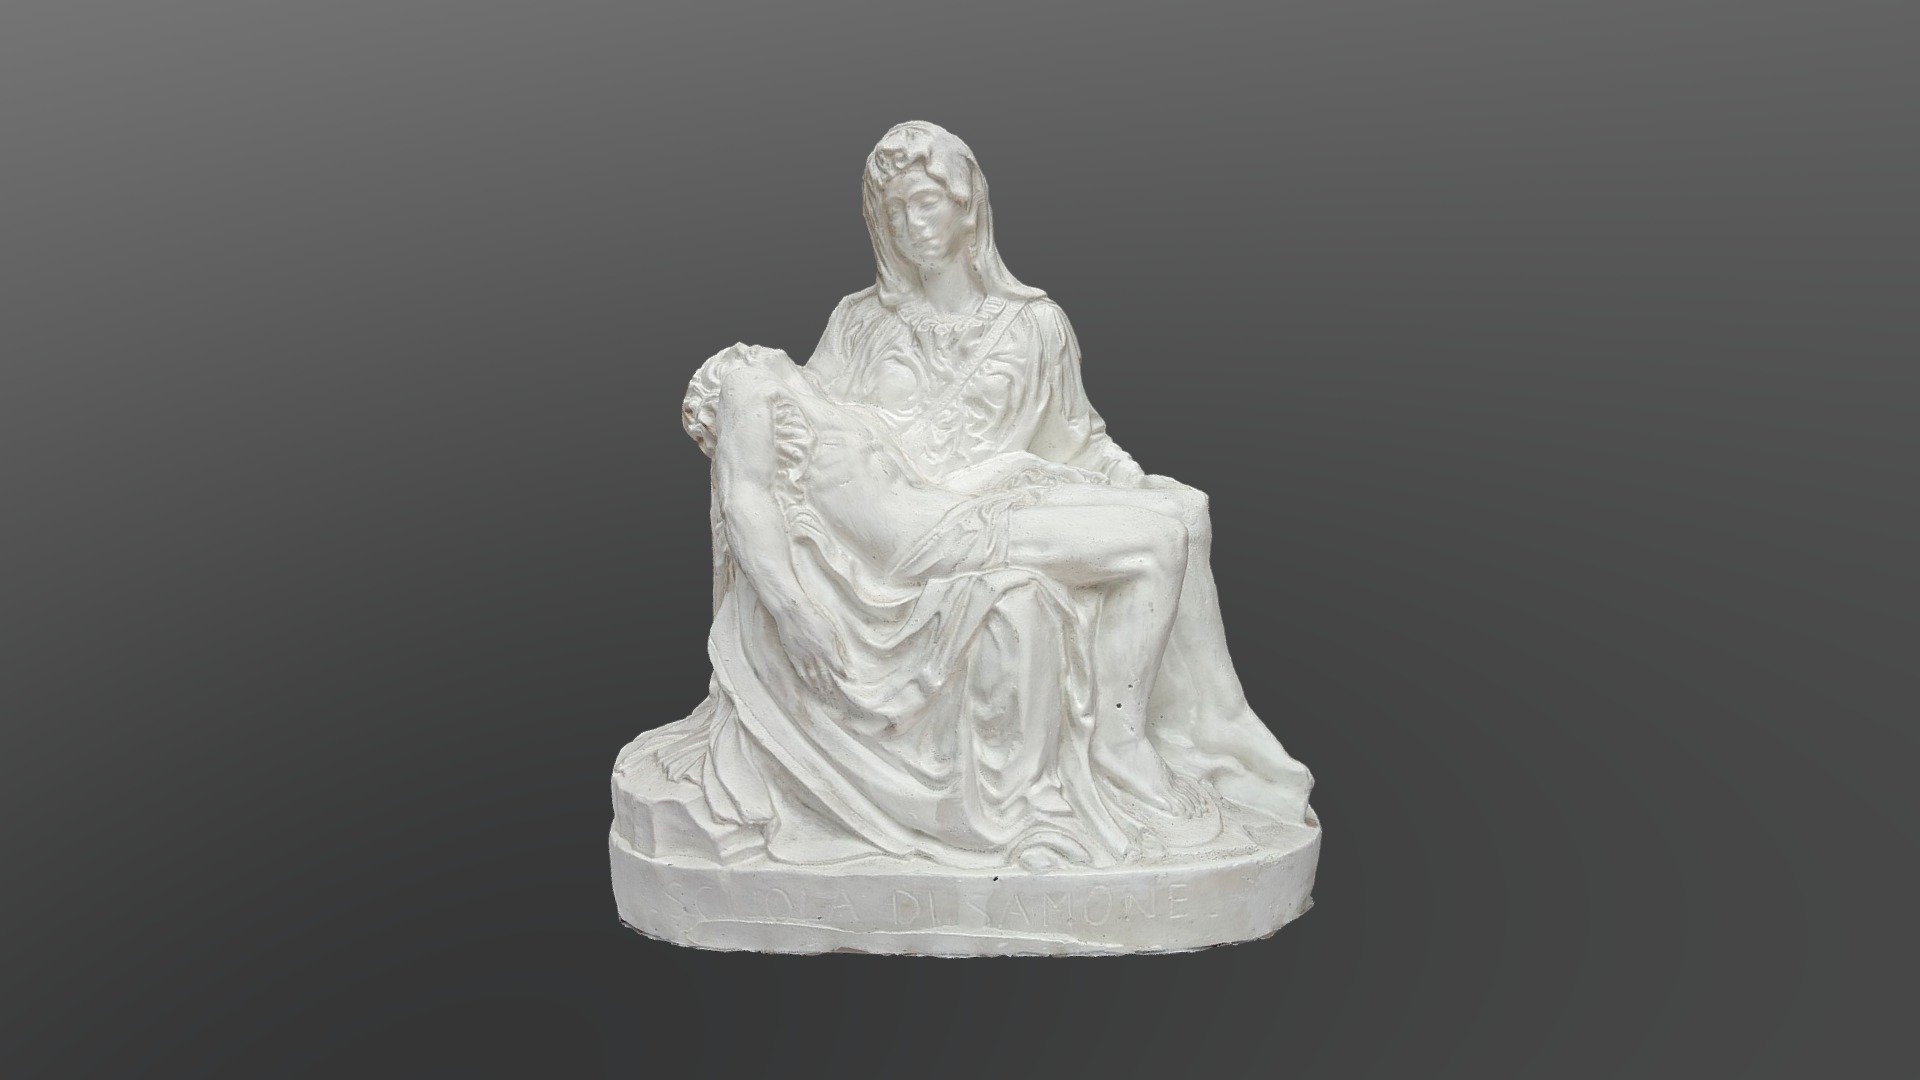 Mary and Jesus Statue